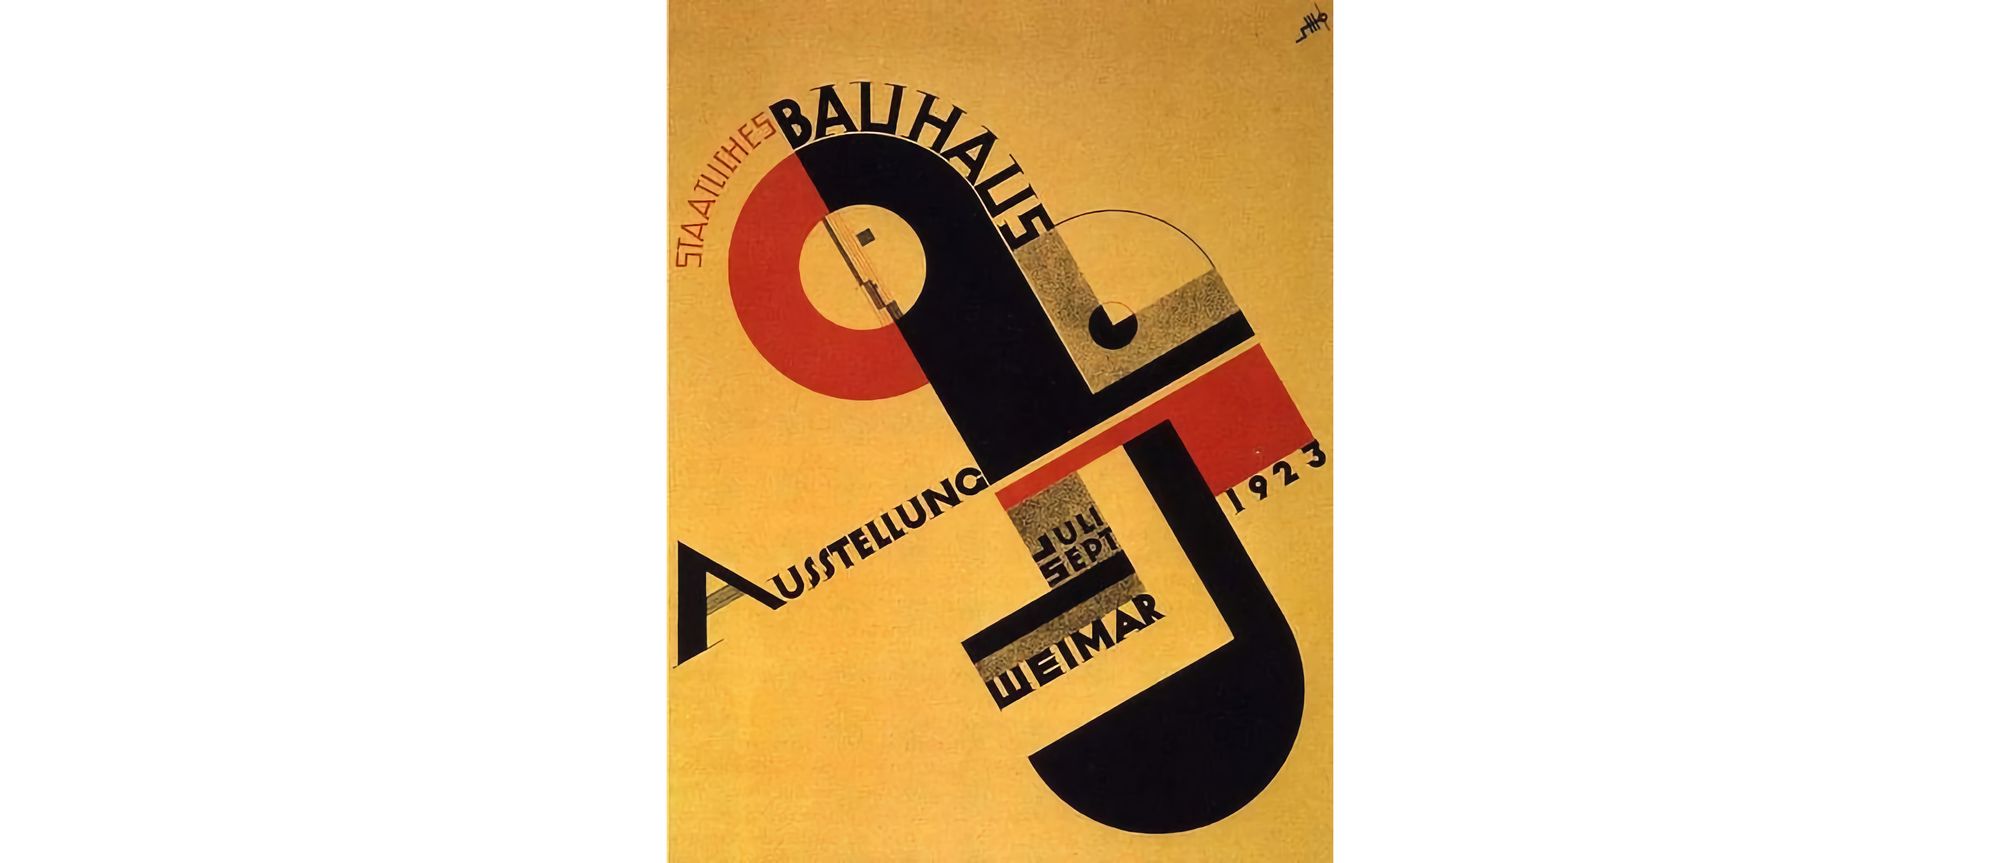 Image of a poster design by Boost Schmidt, from the  Bauhaus, 1923